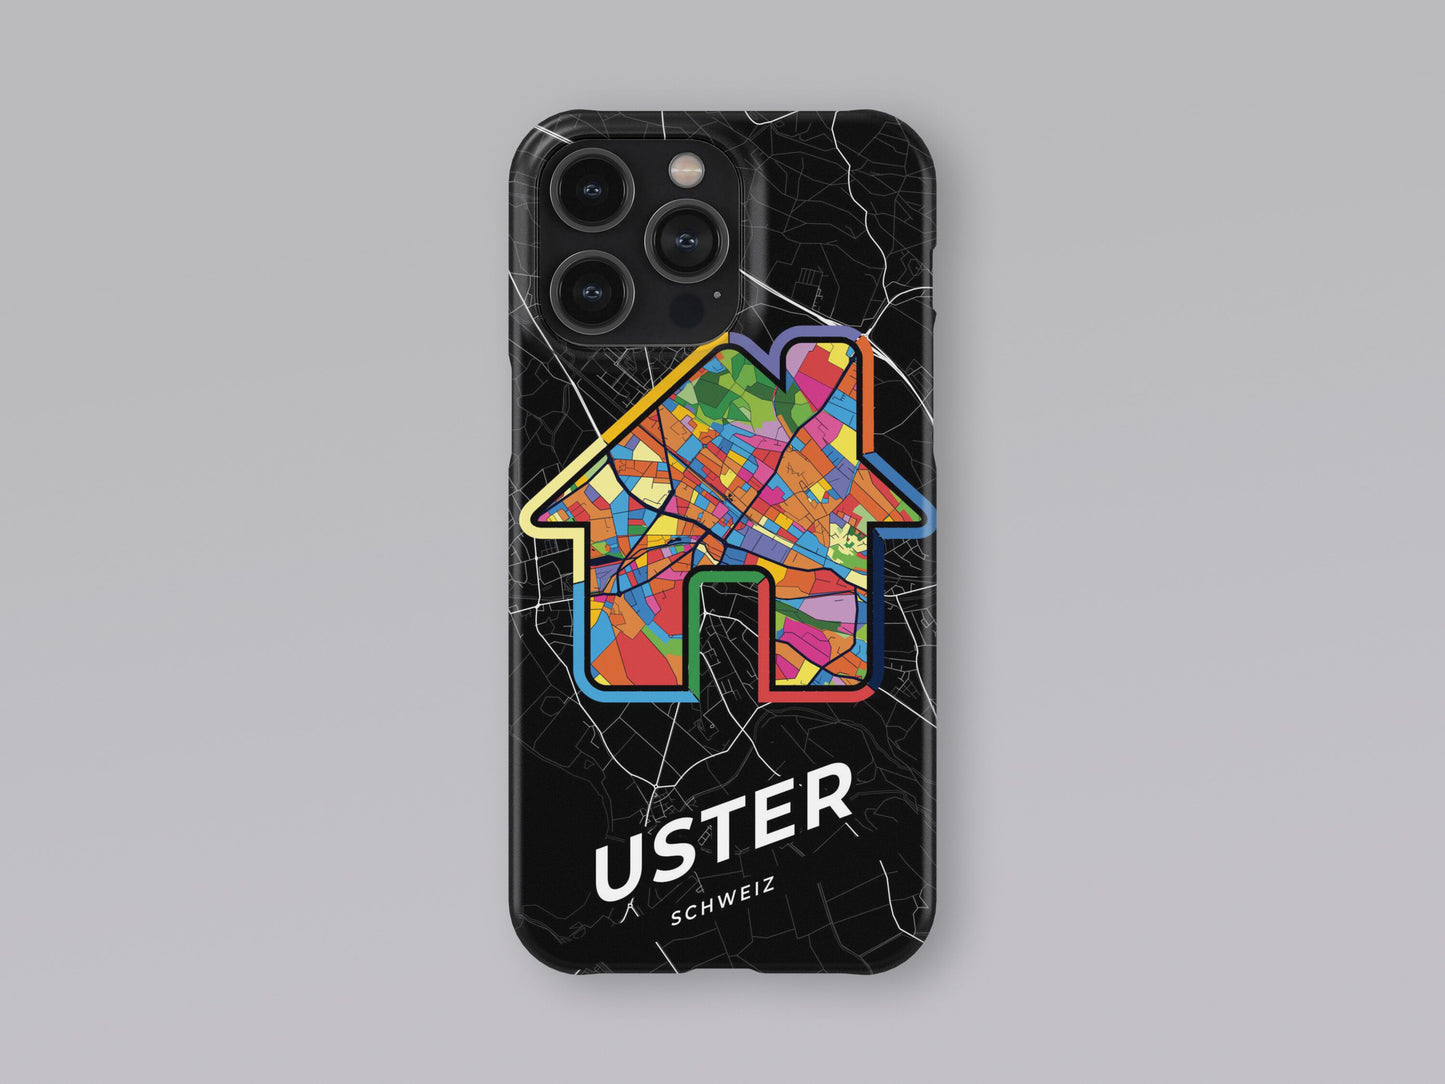 Uster Switzerland slim phone case with colorful icon 3